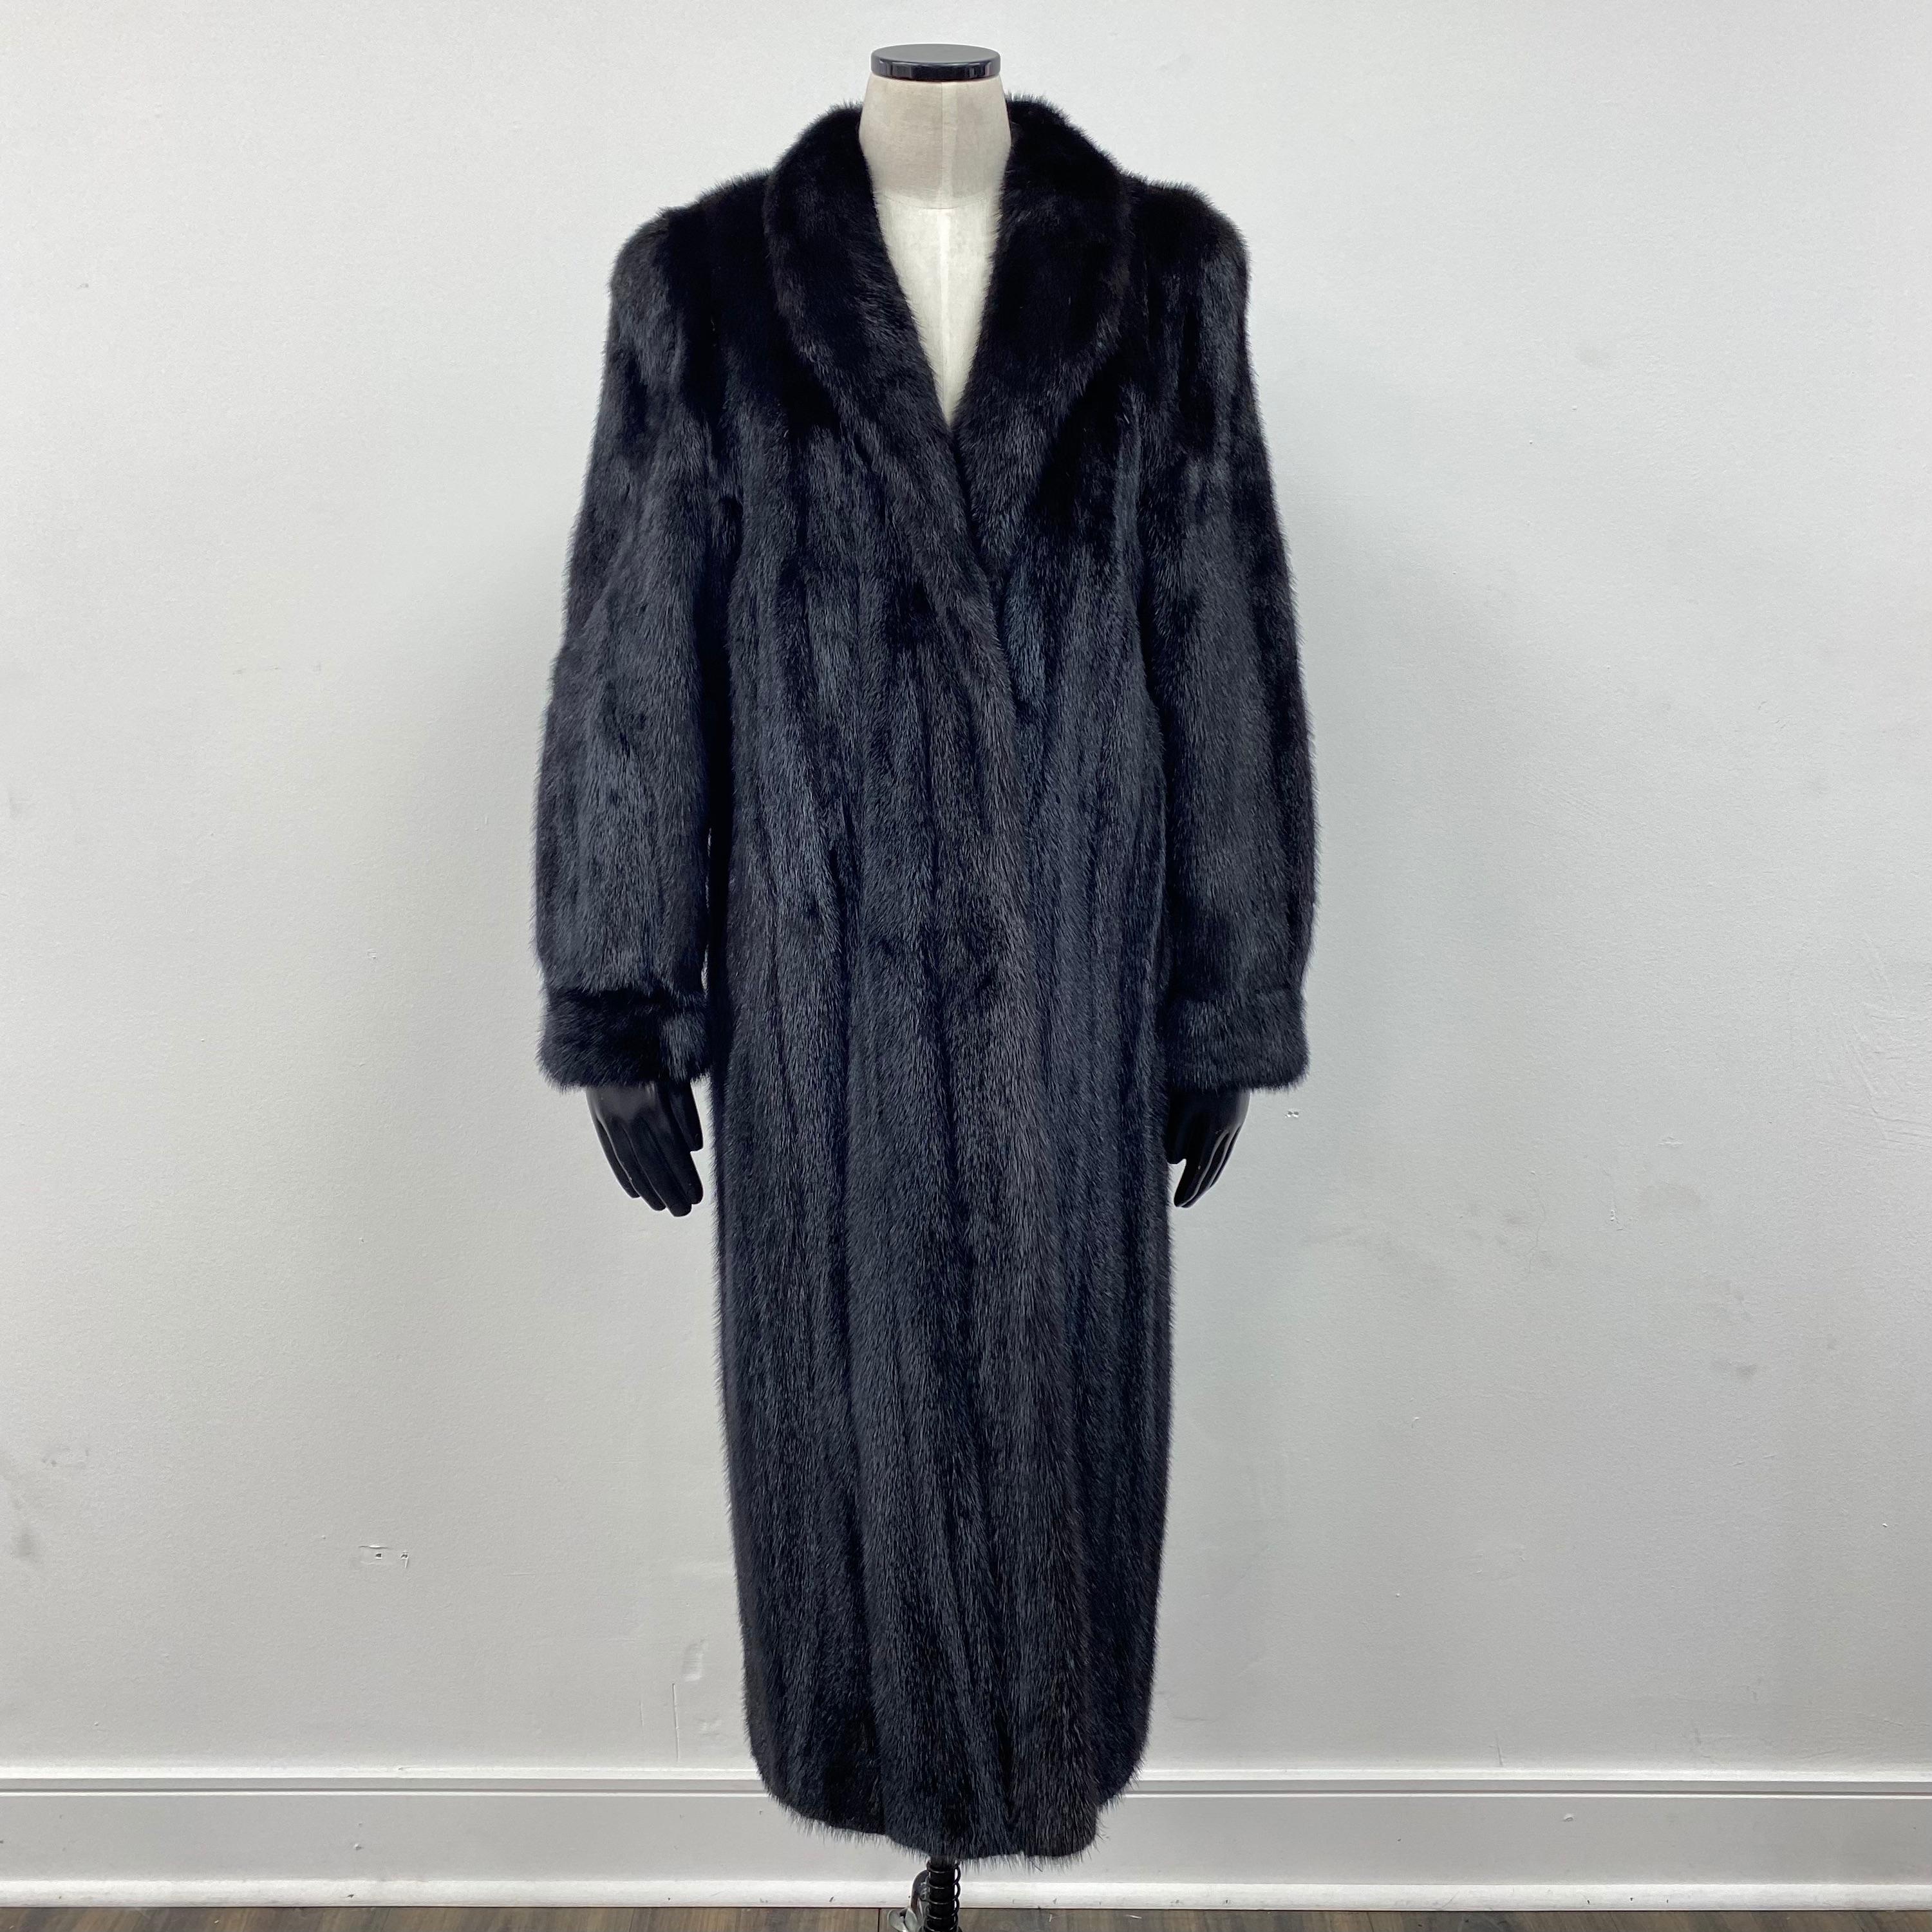 PRODUCT DESCRIPTION:

classic Vincenzo Black Opal mink mid-length fur coat 

Condition: Like new

Closure: Hooks & Eyes

Color: Black

Material: Black opal mink 
Garment type: mid-length Coat

Sleeves: Dolman with bracelet cuffs
Pockets: Two side